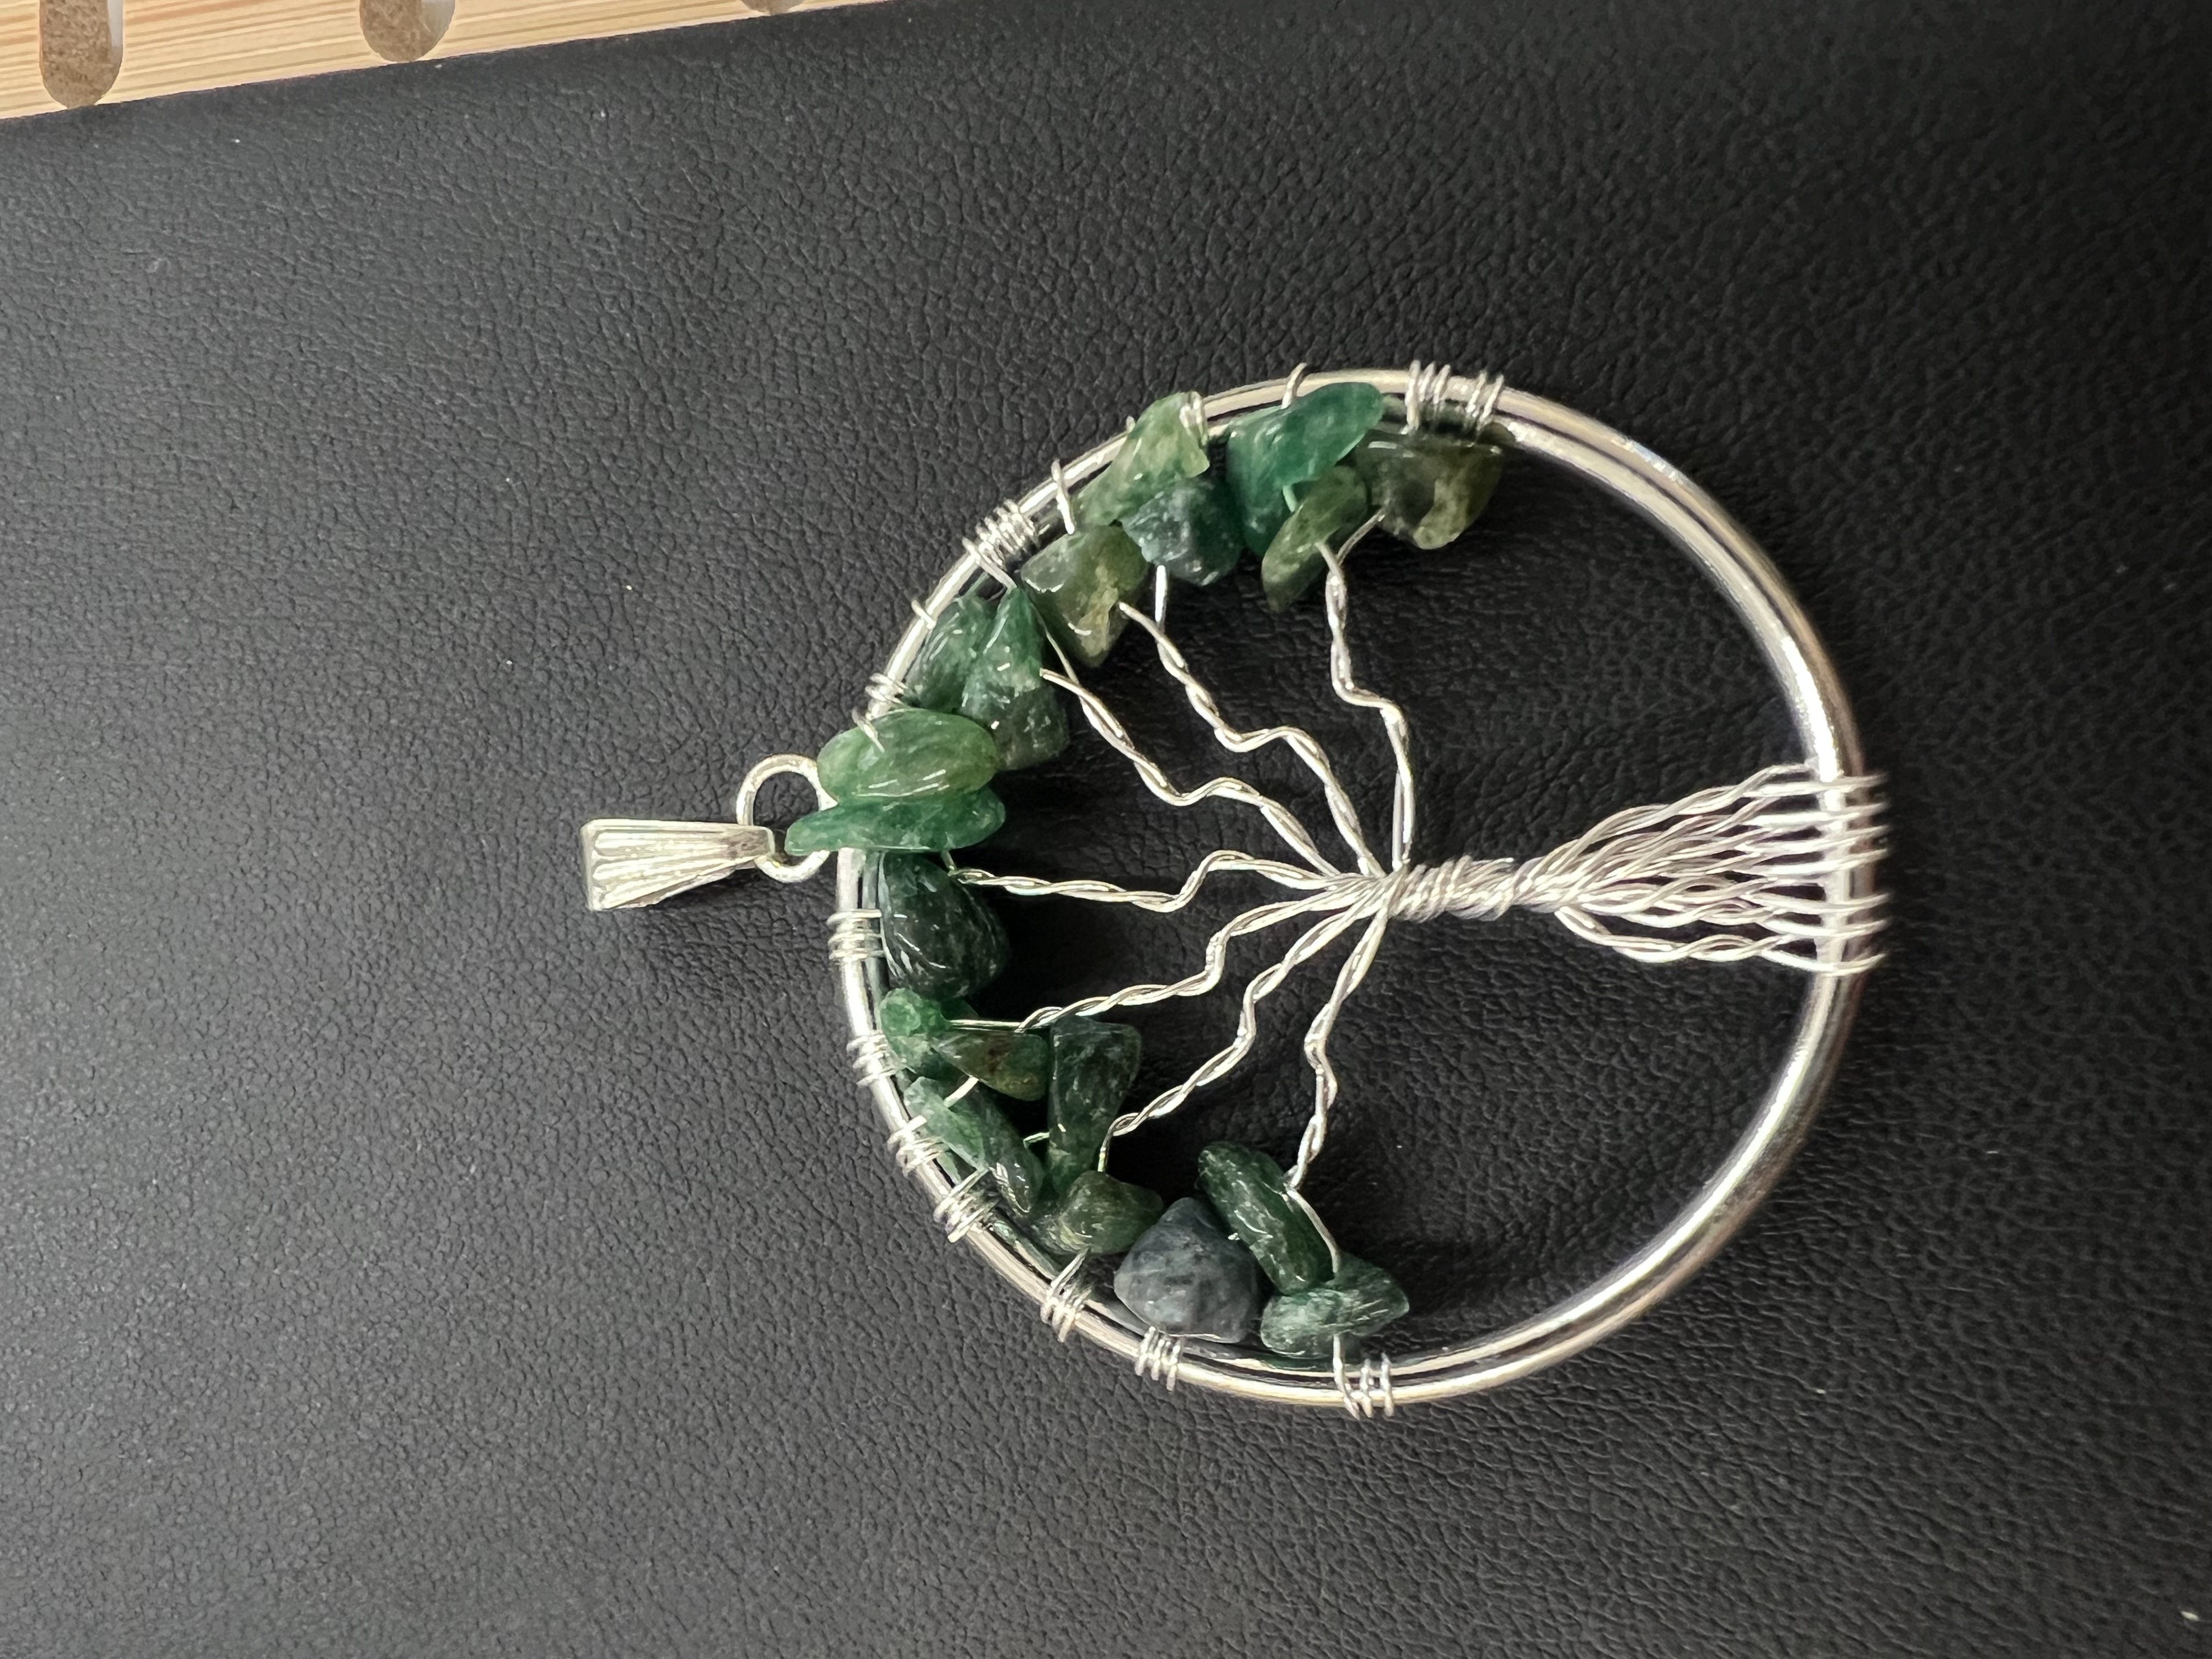 Natural Stone Tree of Life Pendant in Silver - 1.5 inches - Green Aventurine